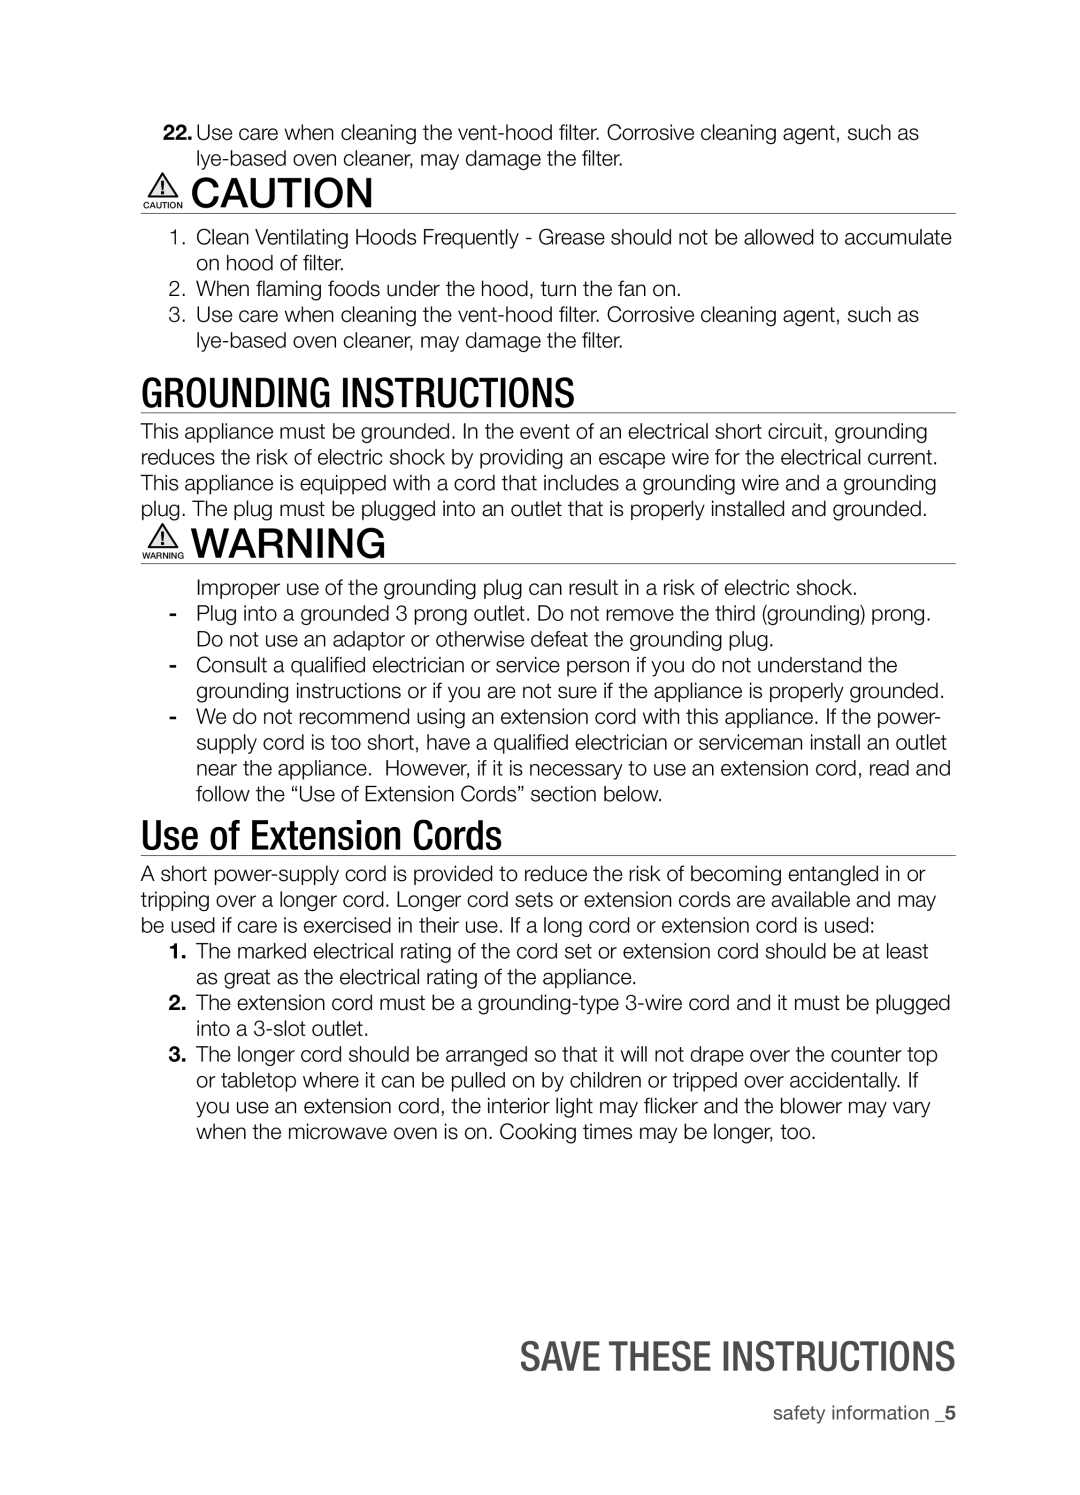 Samsung SMH9207ST user manual Grounding Instructions, Use of Extension Cords, Save these instructions 